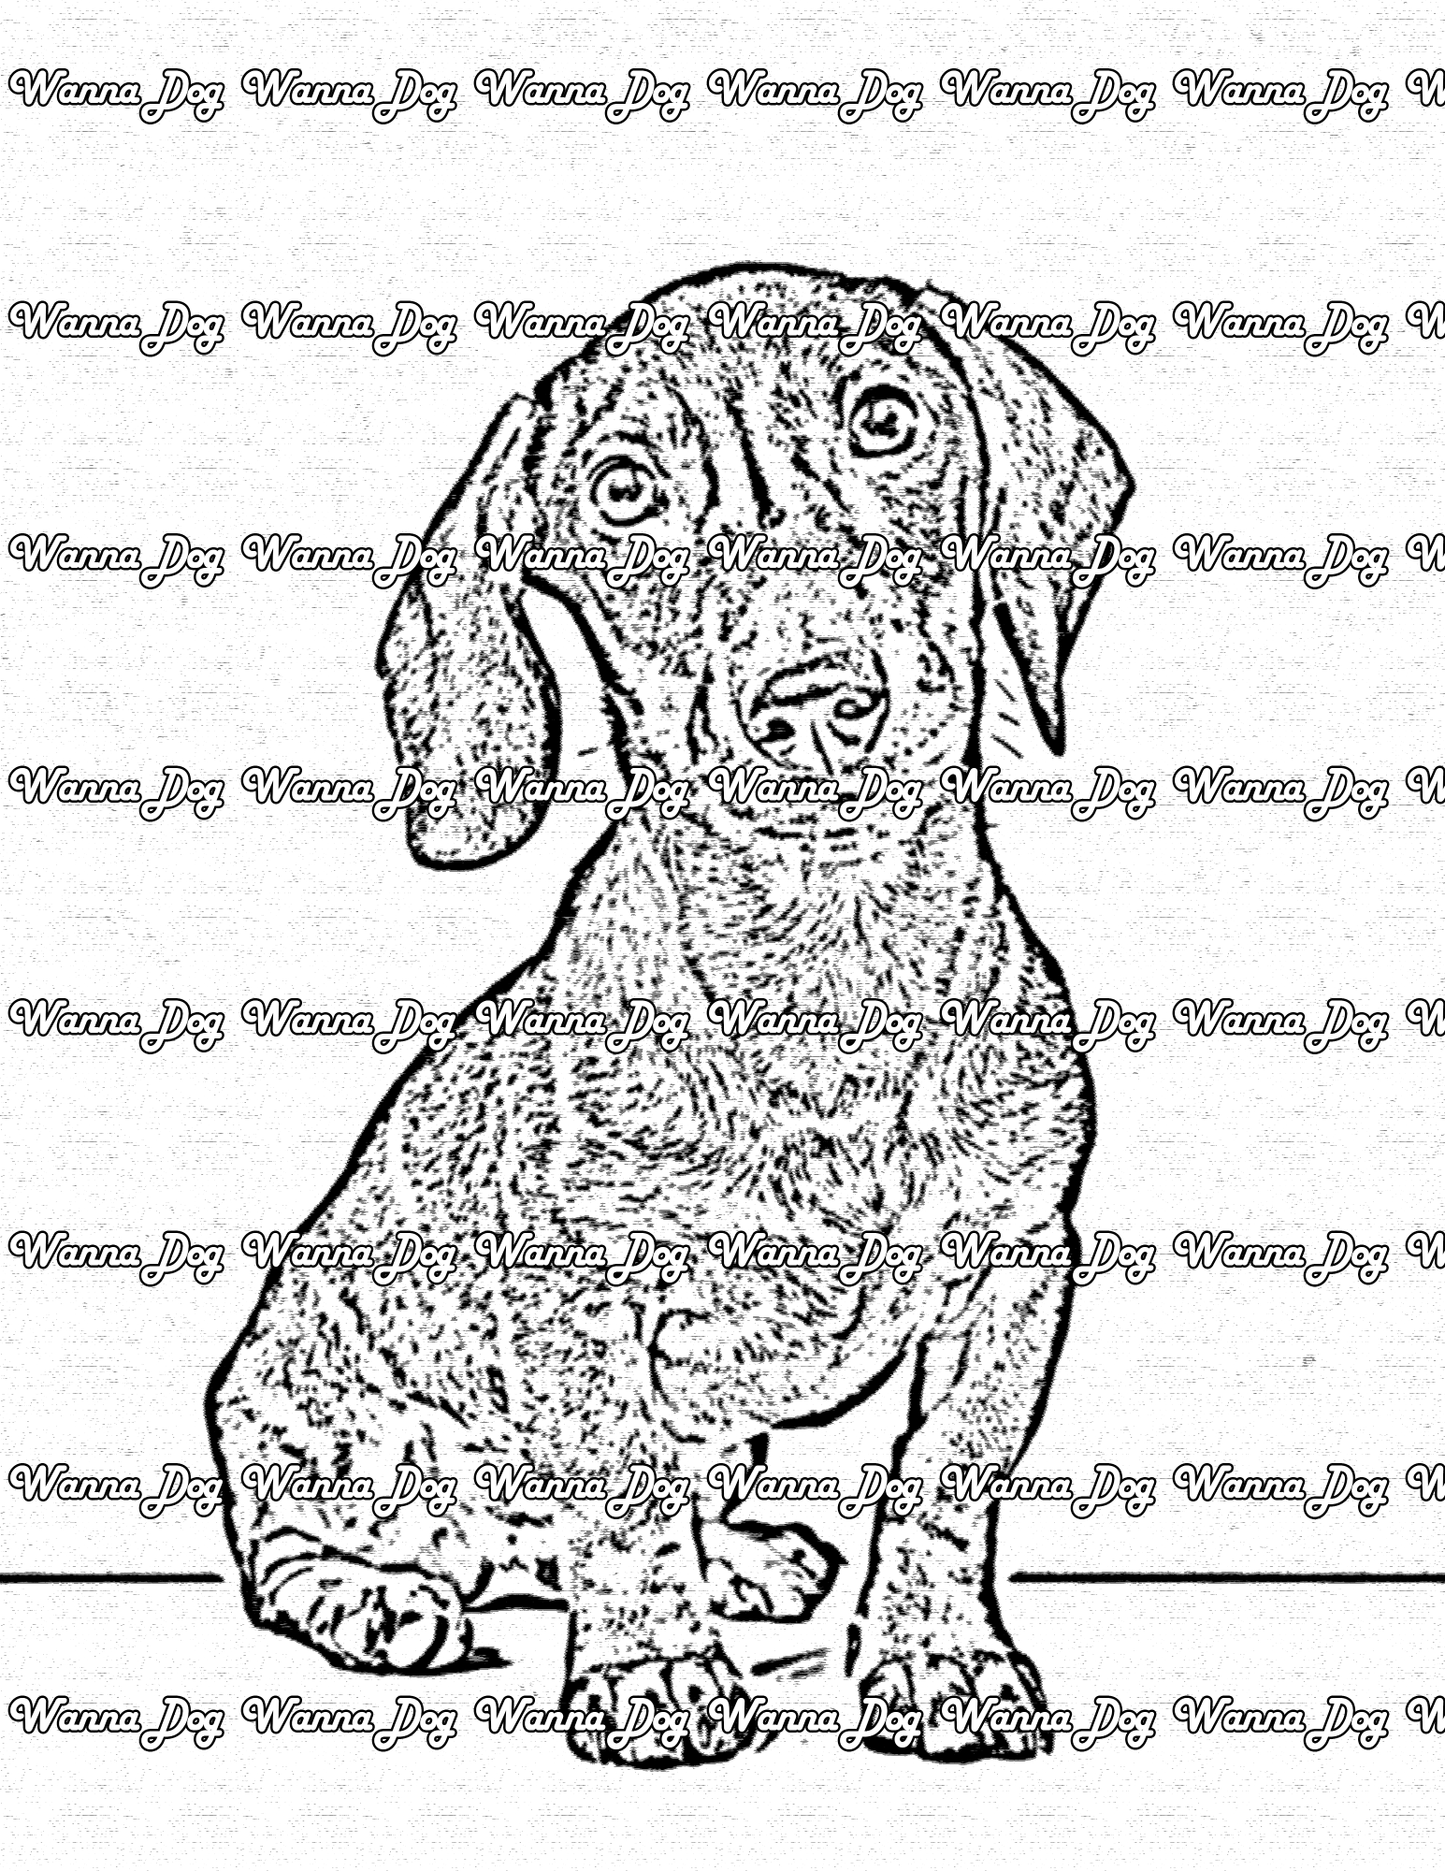 Dachshund Coloring Page of a Dachshund posing